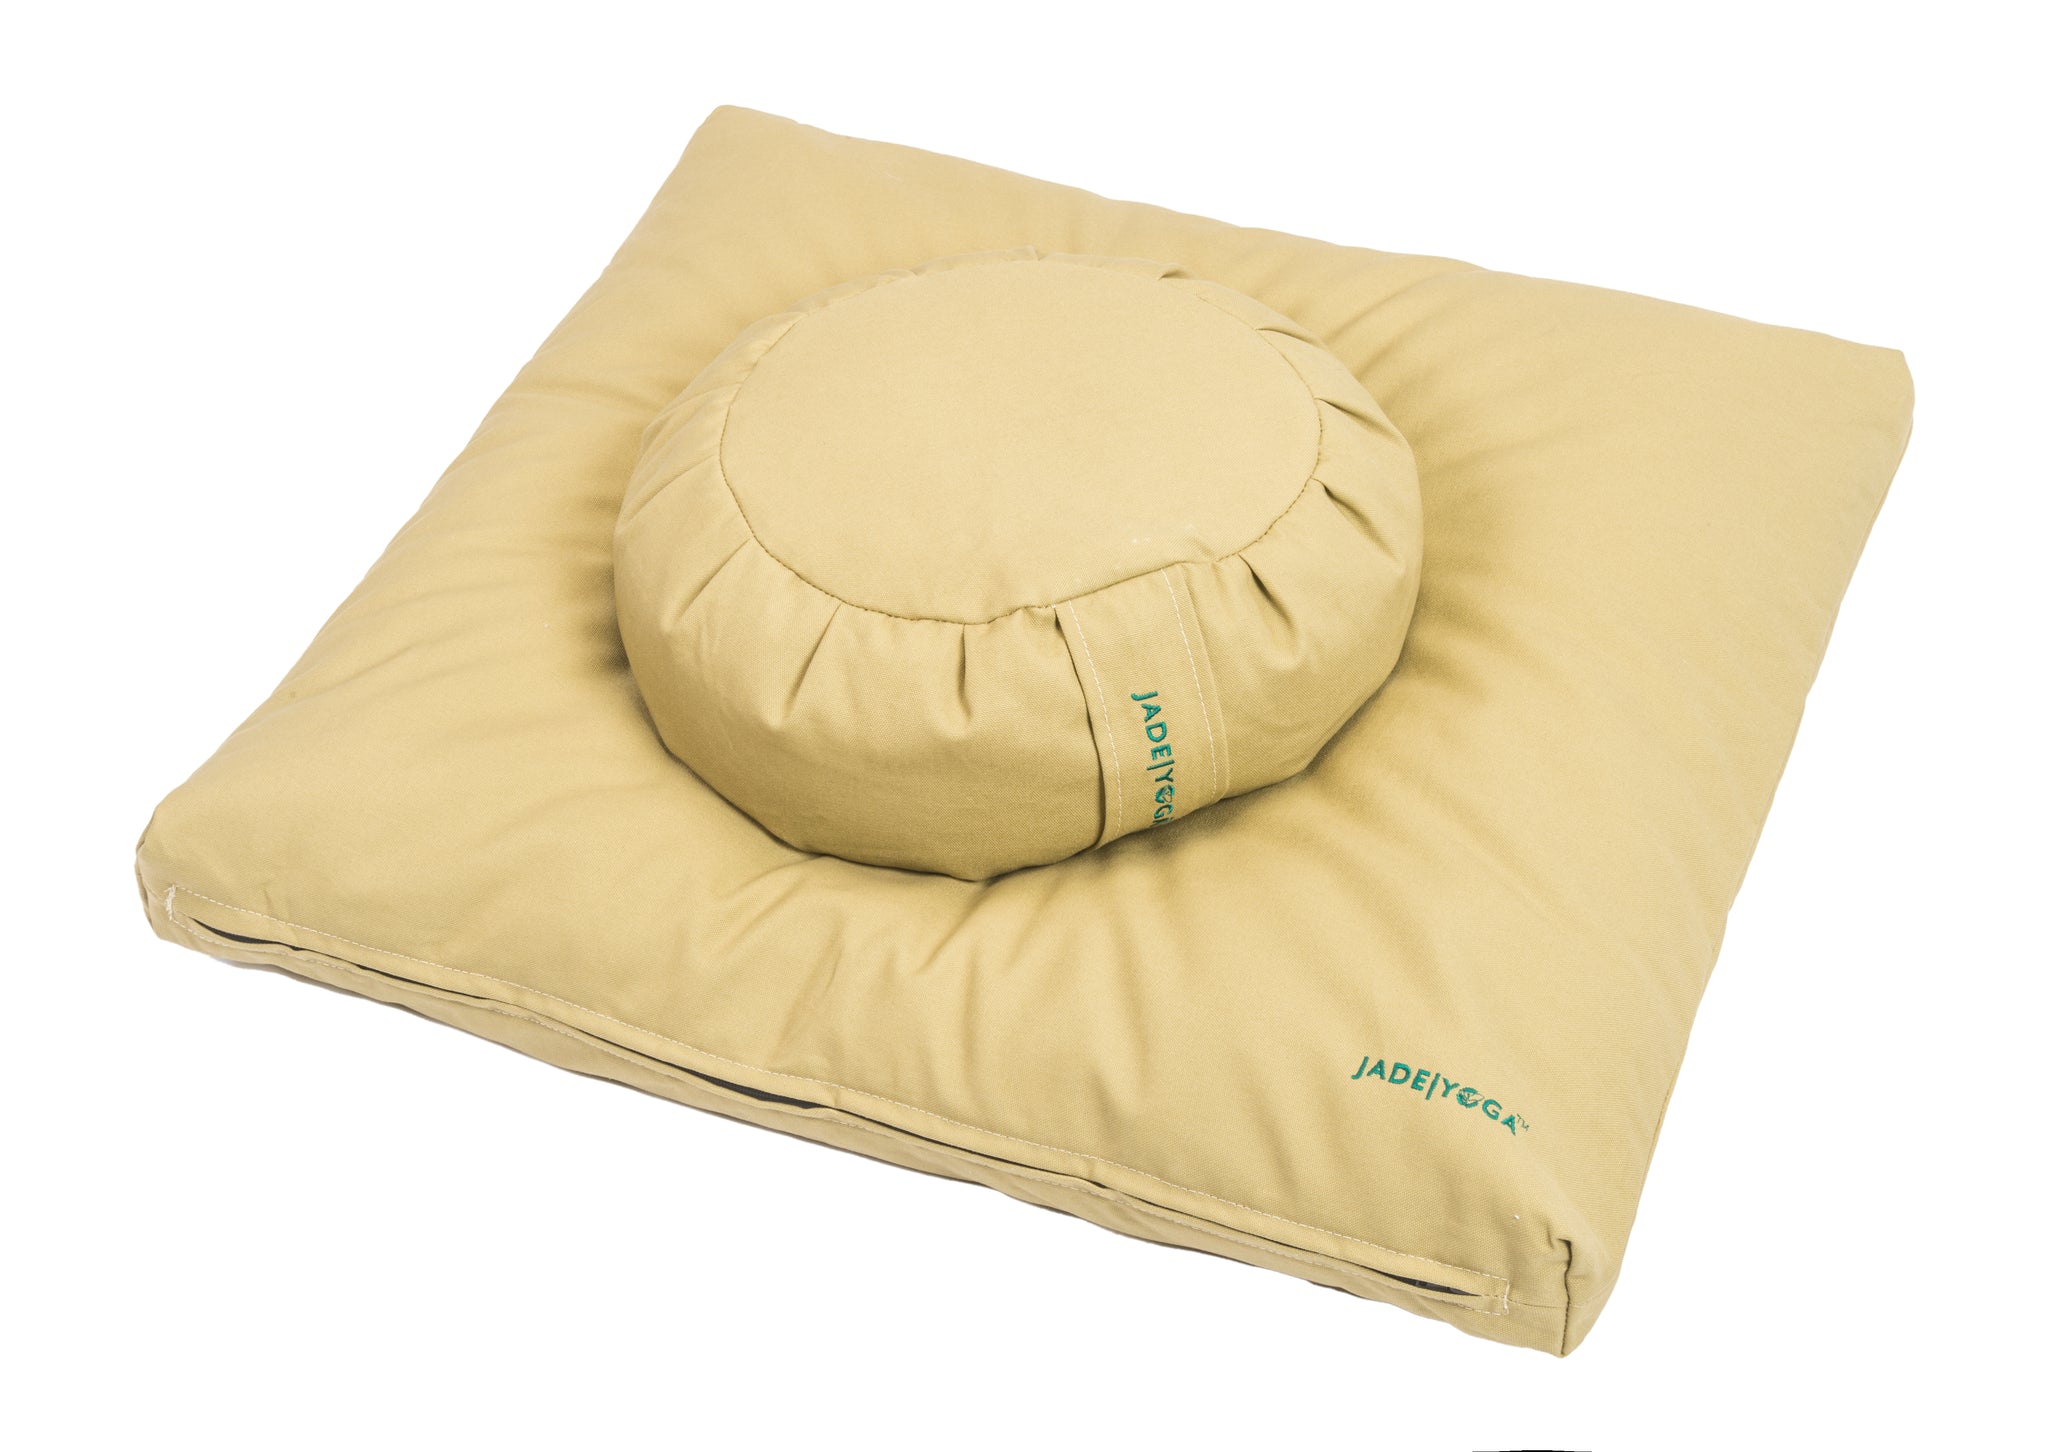 Best-Selling Meditation Cushion for Beginners and Experts – JadeYoga